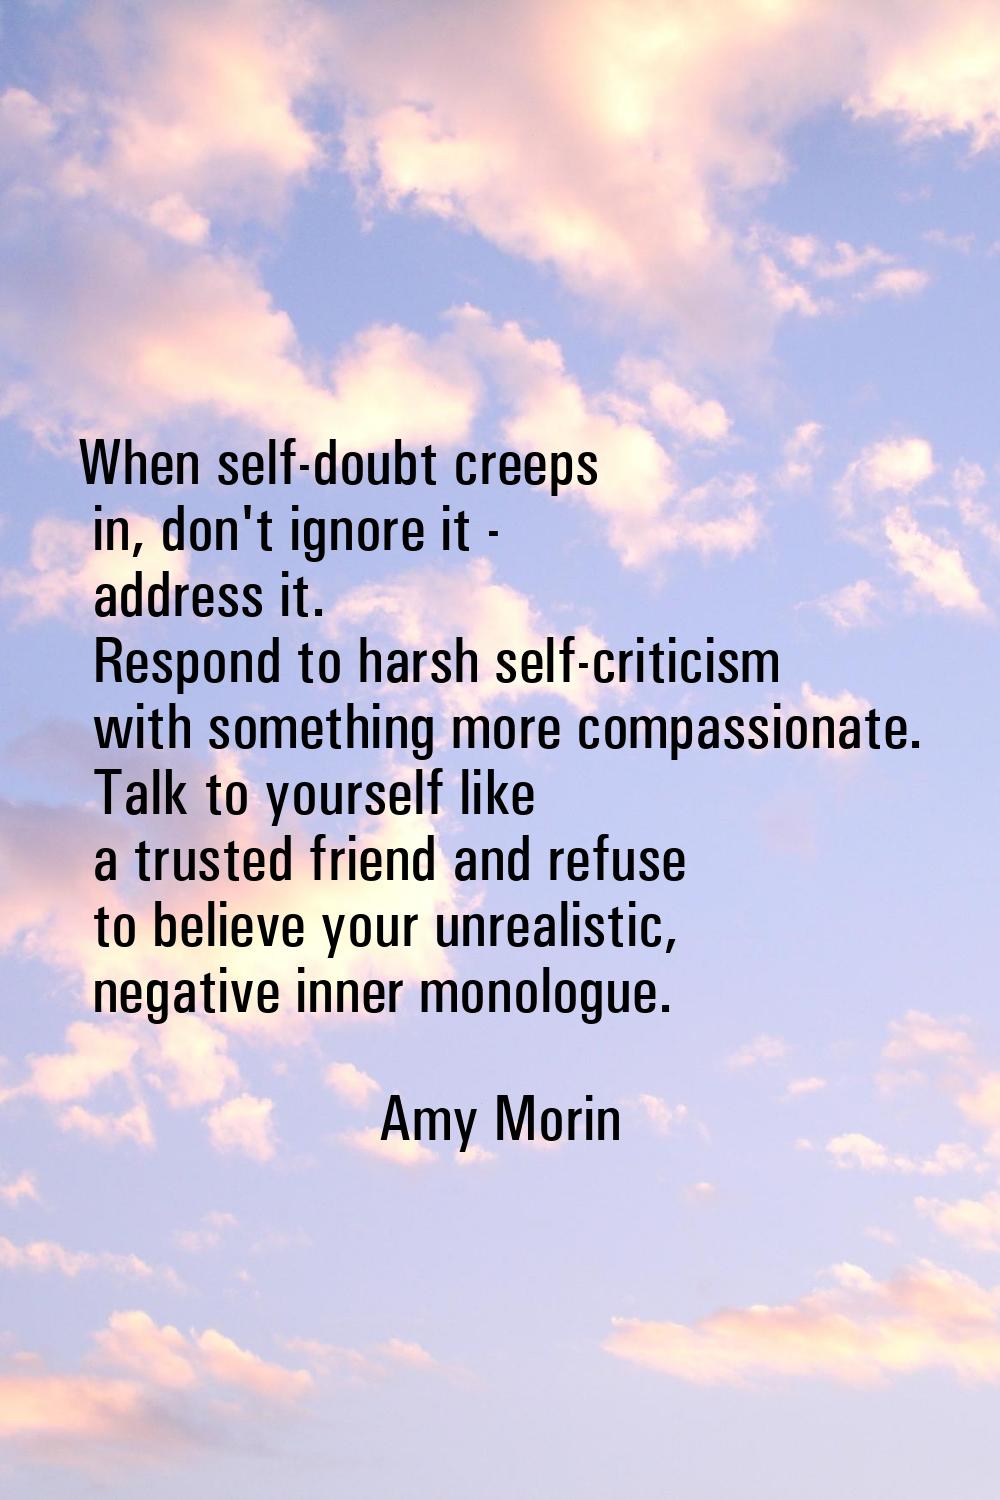 When self-doubt creeps in, don't ignore it - address it. Respond to harsh self-criticism with somet